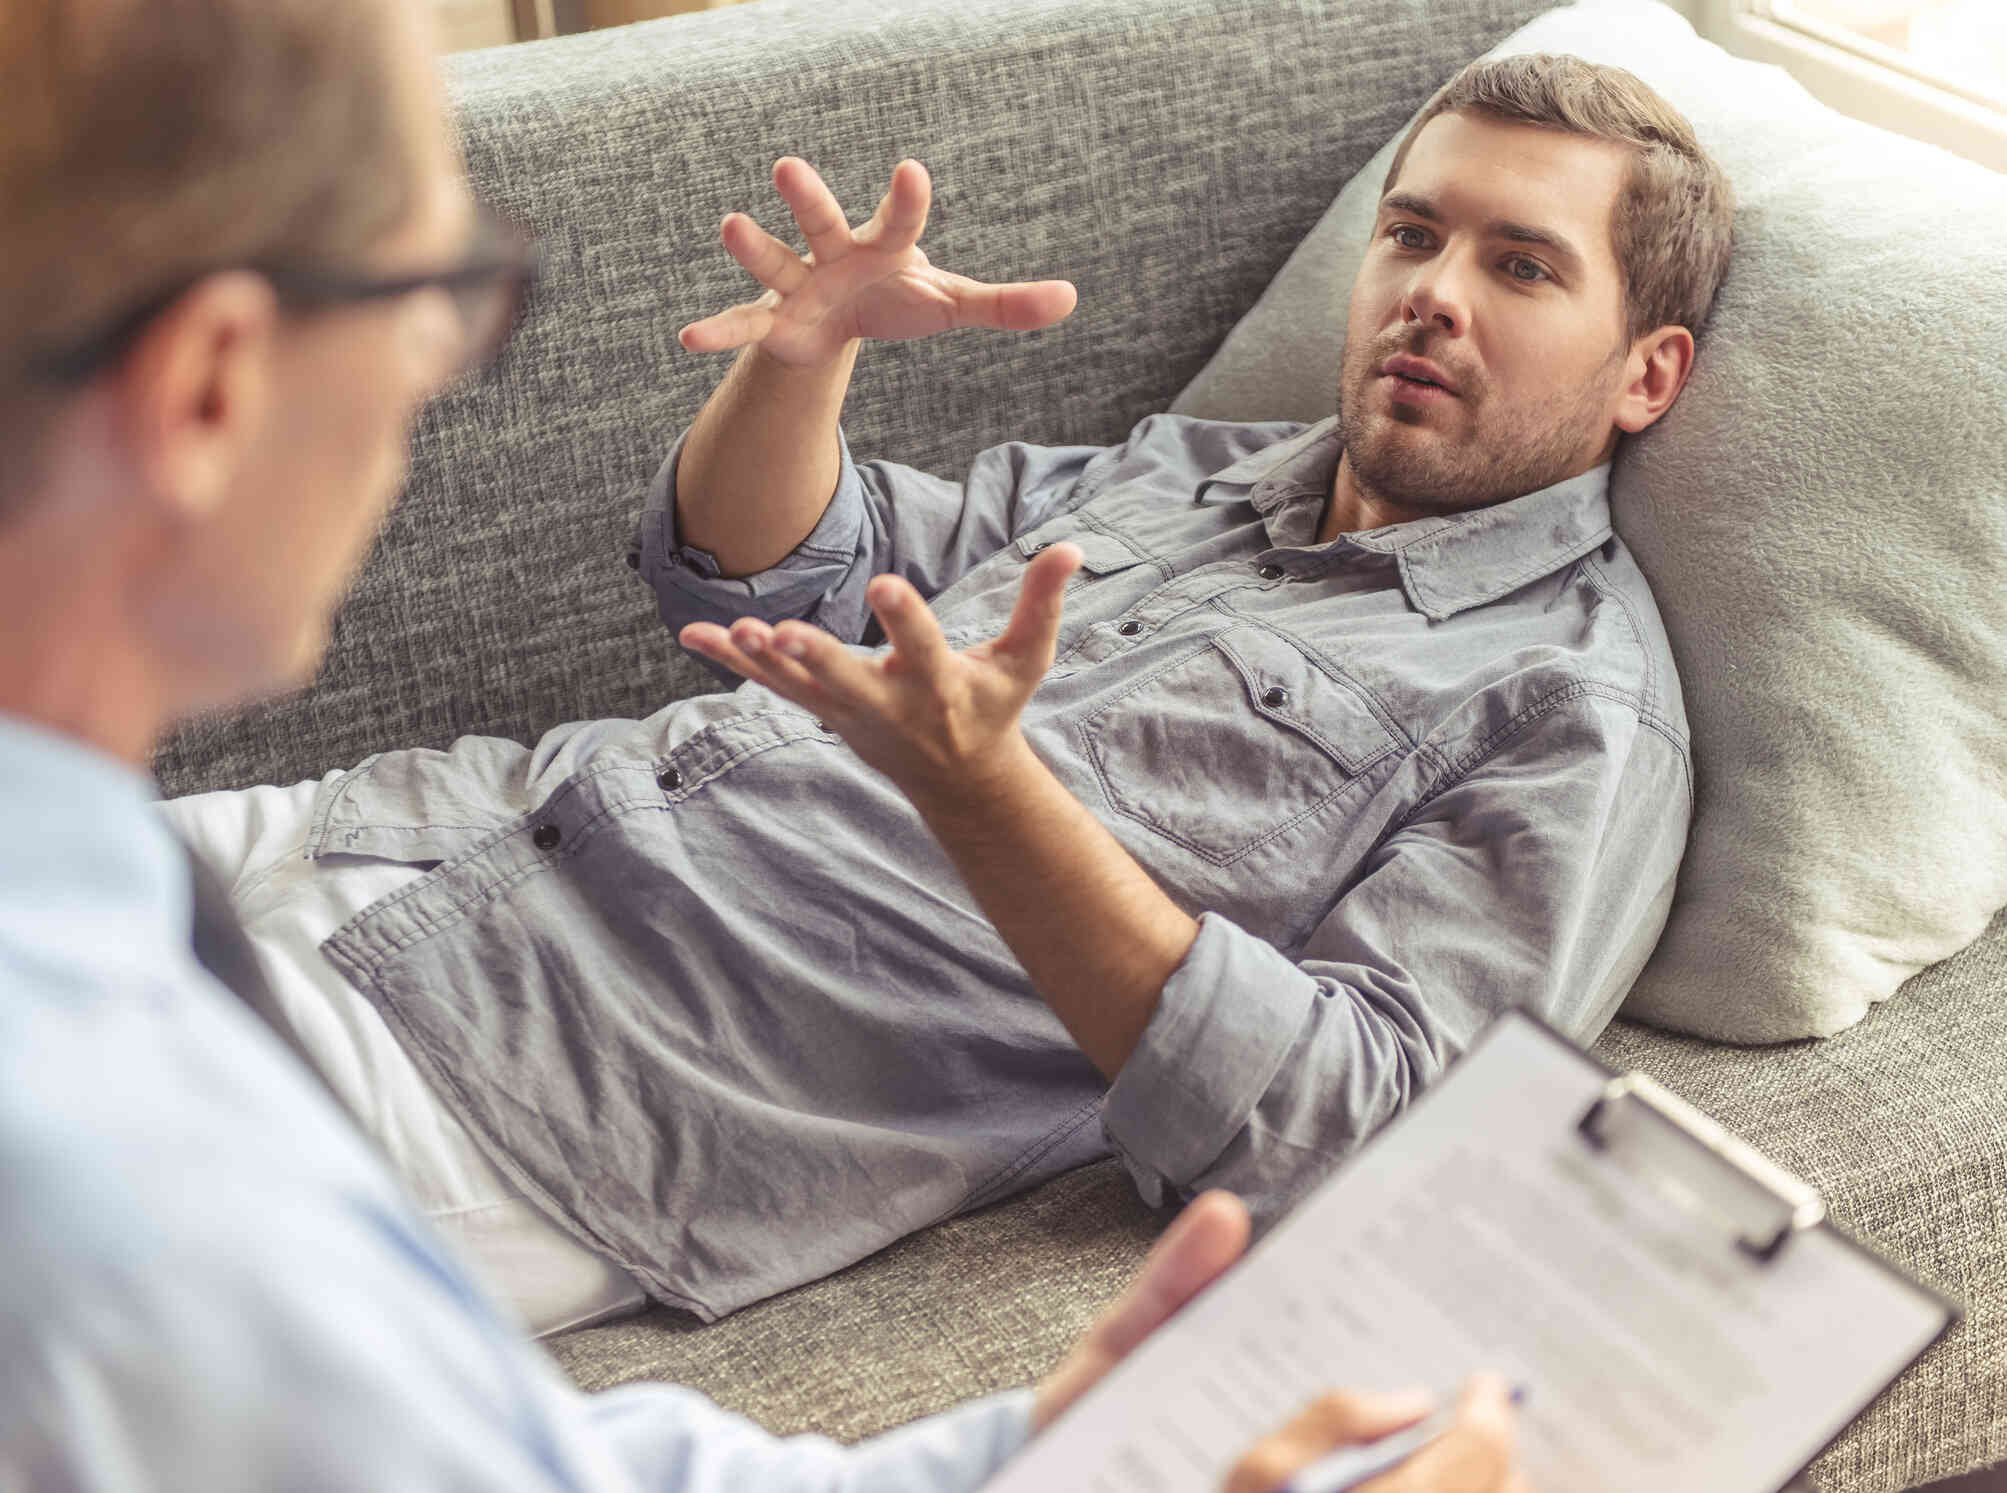 A man in a grey button down shirt lays on his back on a couch and talks to the therapist sitting next to him during a therapy session.